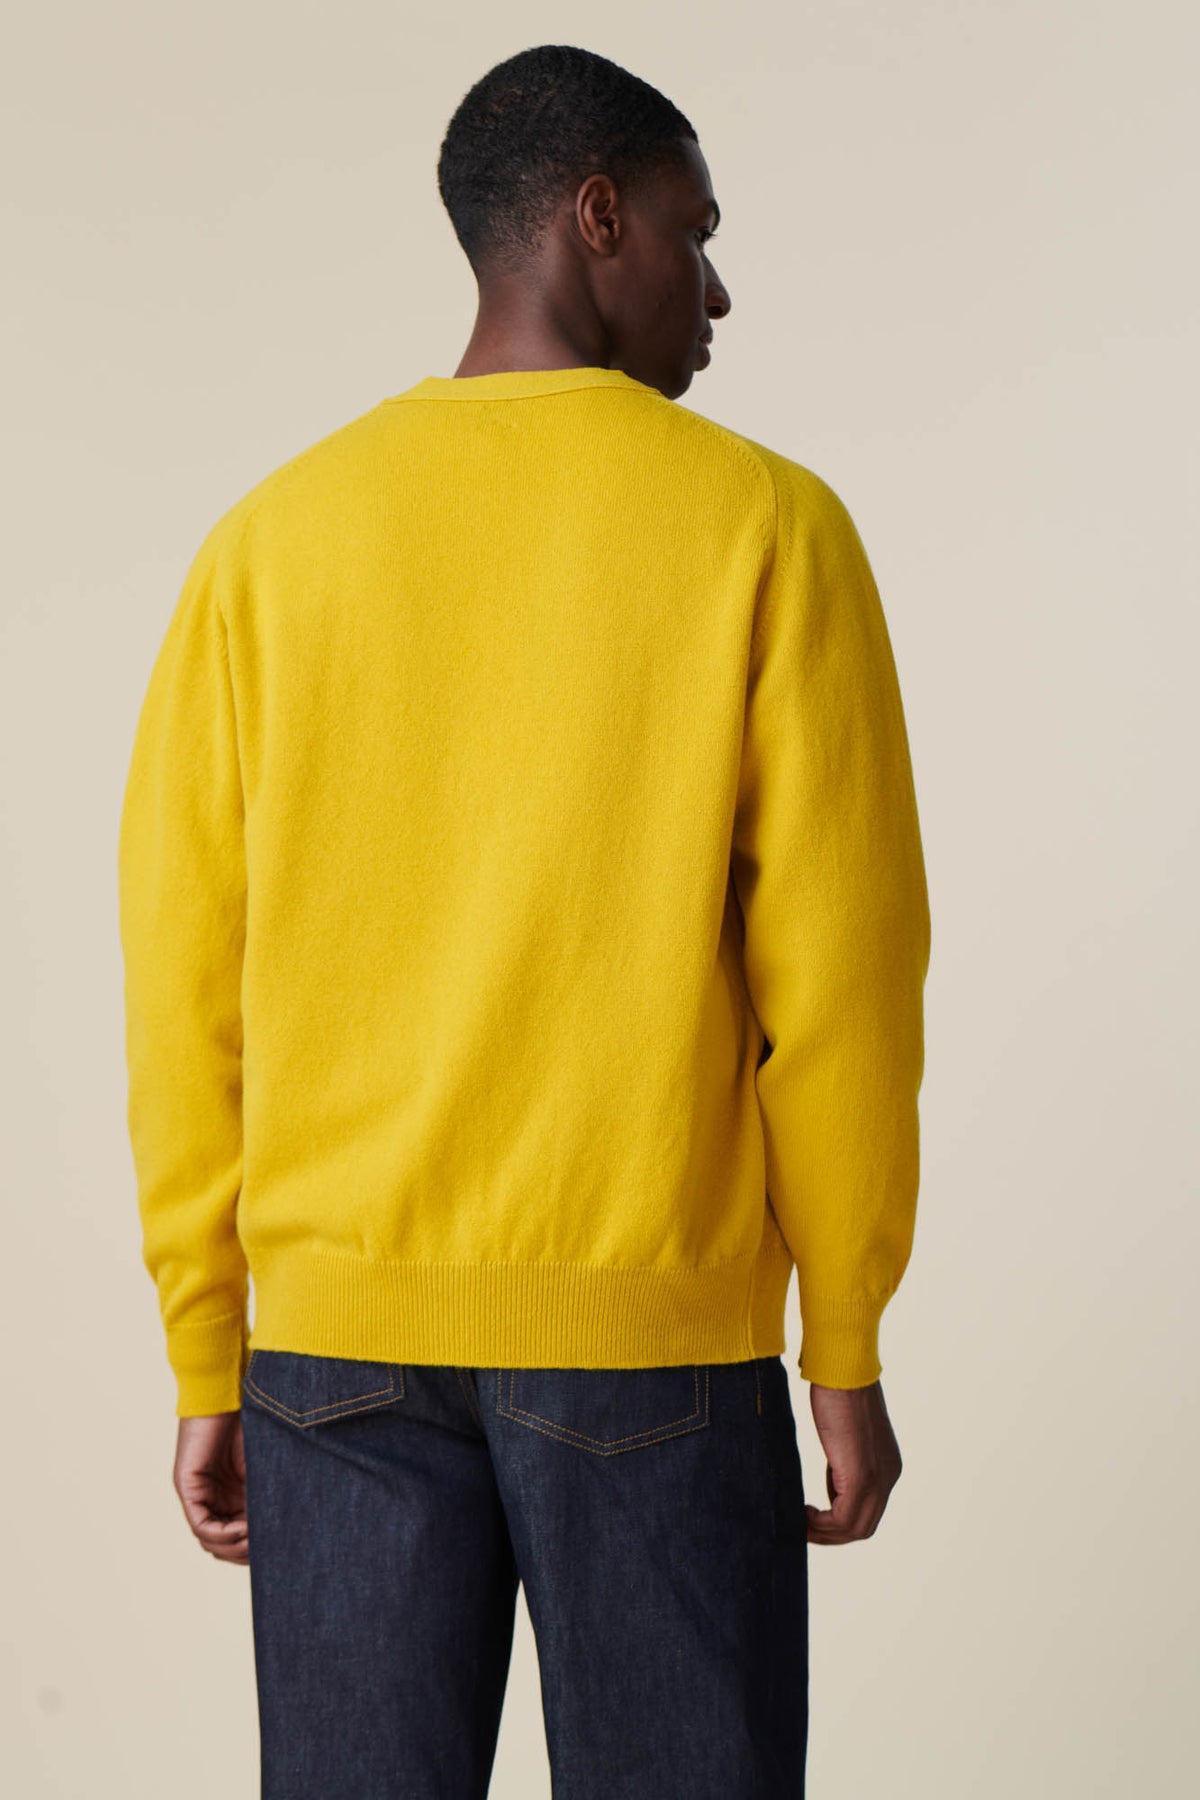 
            Back of male wearing lambswool cardigan in picalilli yellow